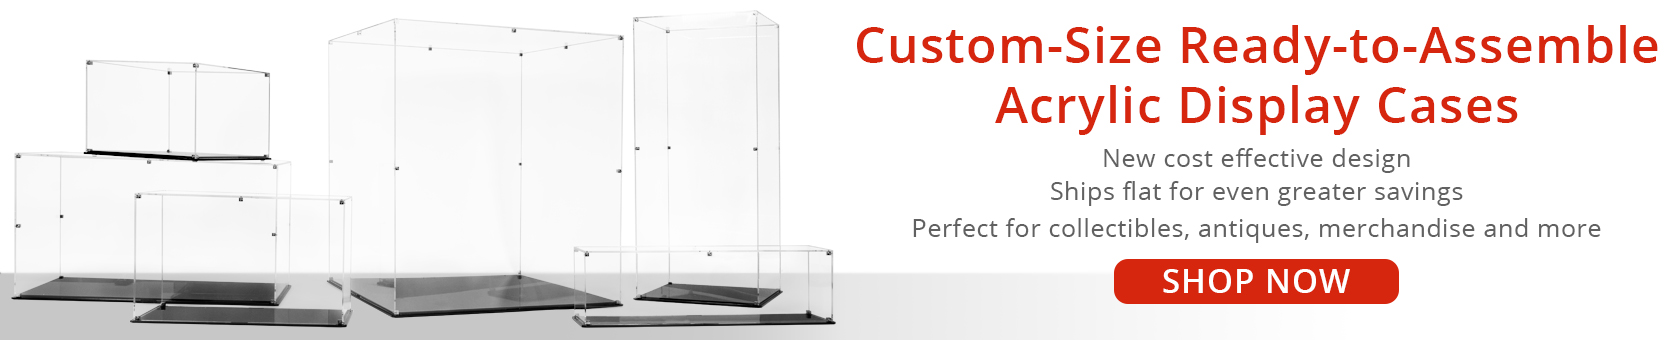 Custom-size ready to assemble acrylic display cases